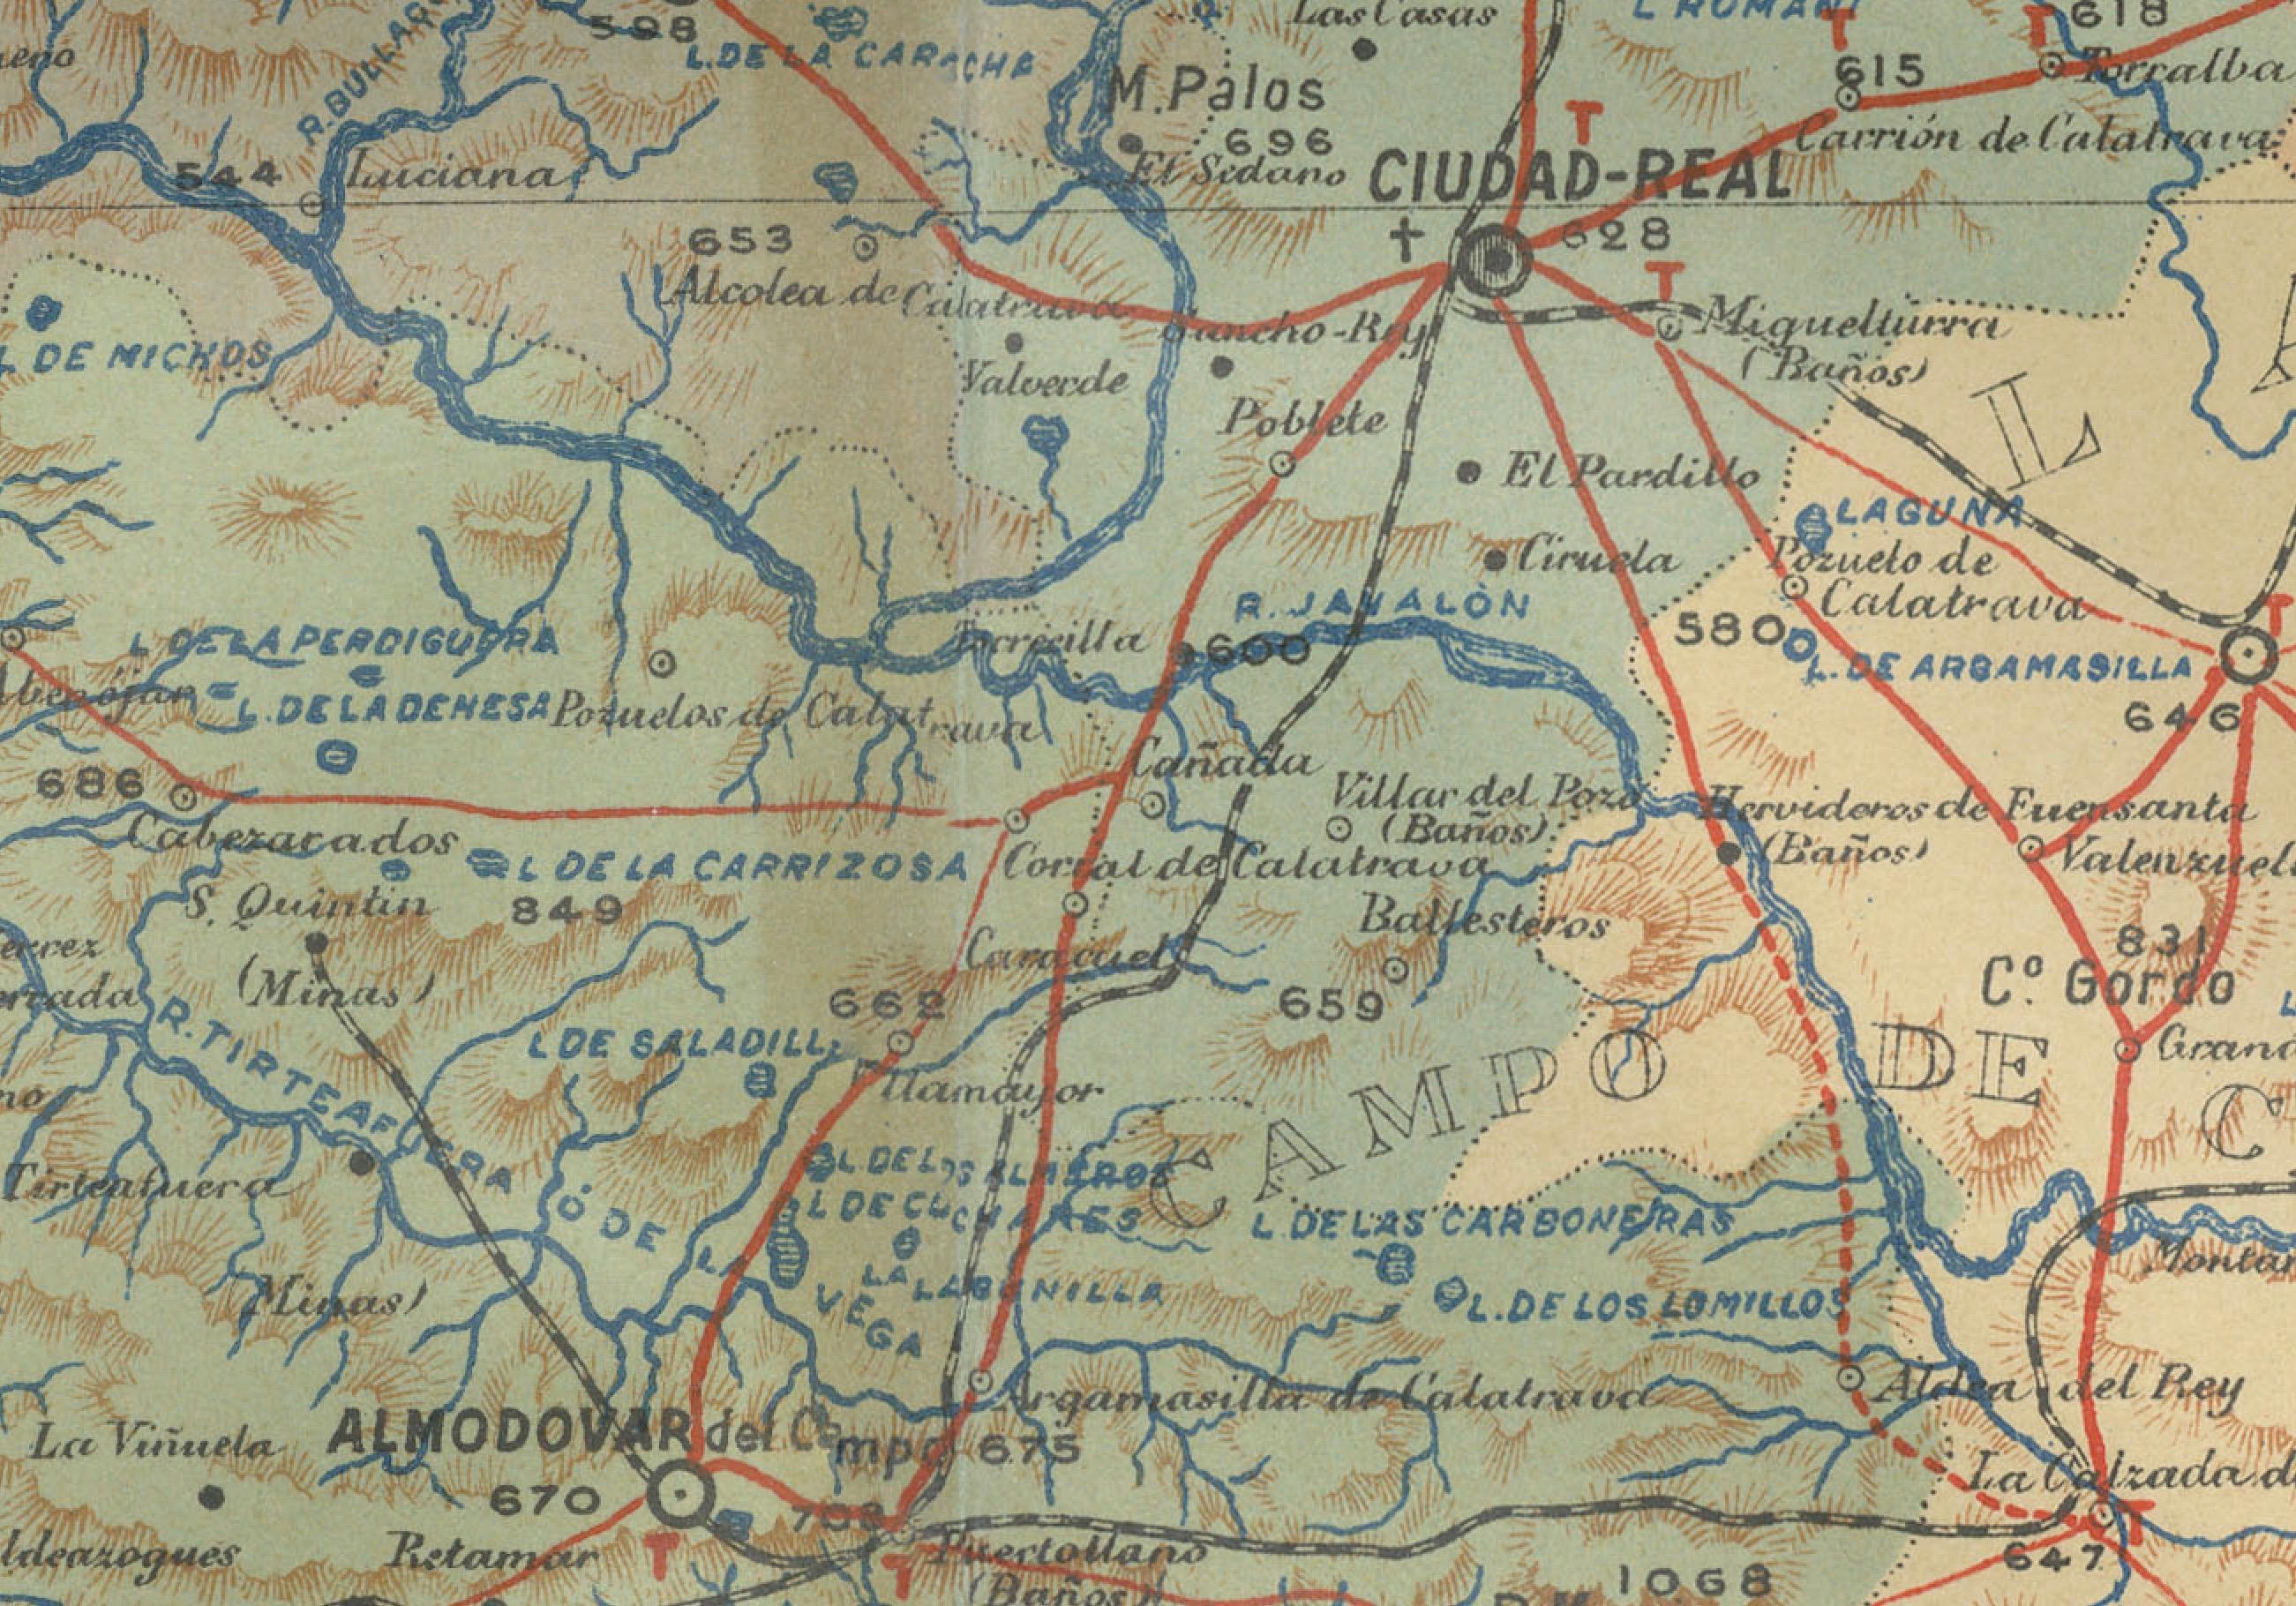 This original antitque map presents the province of Ciudad Real, located in the autonomous community of Castilla-La Mancha in central Spain, as of 1902. It includes several notable features:

The terrain is depicted with contour lines indicating the